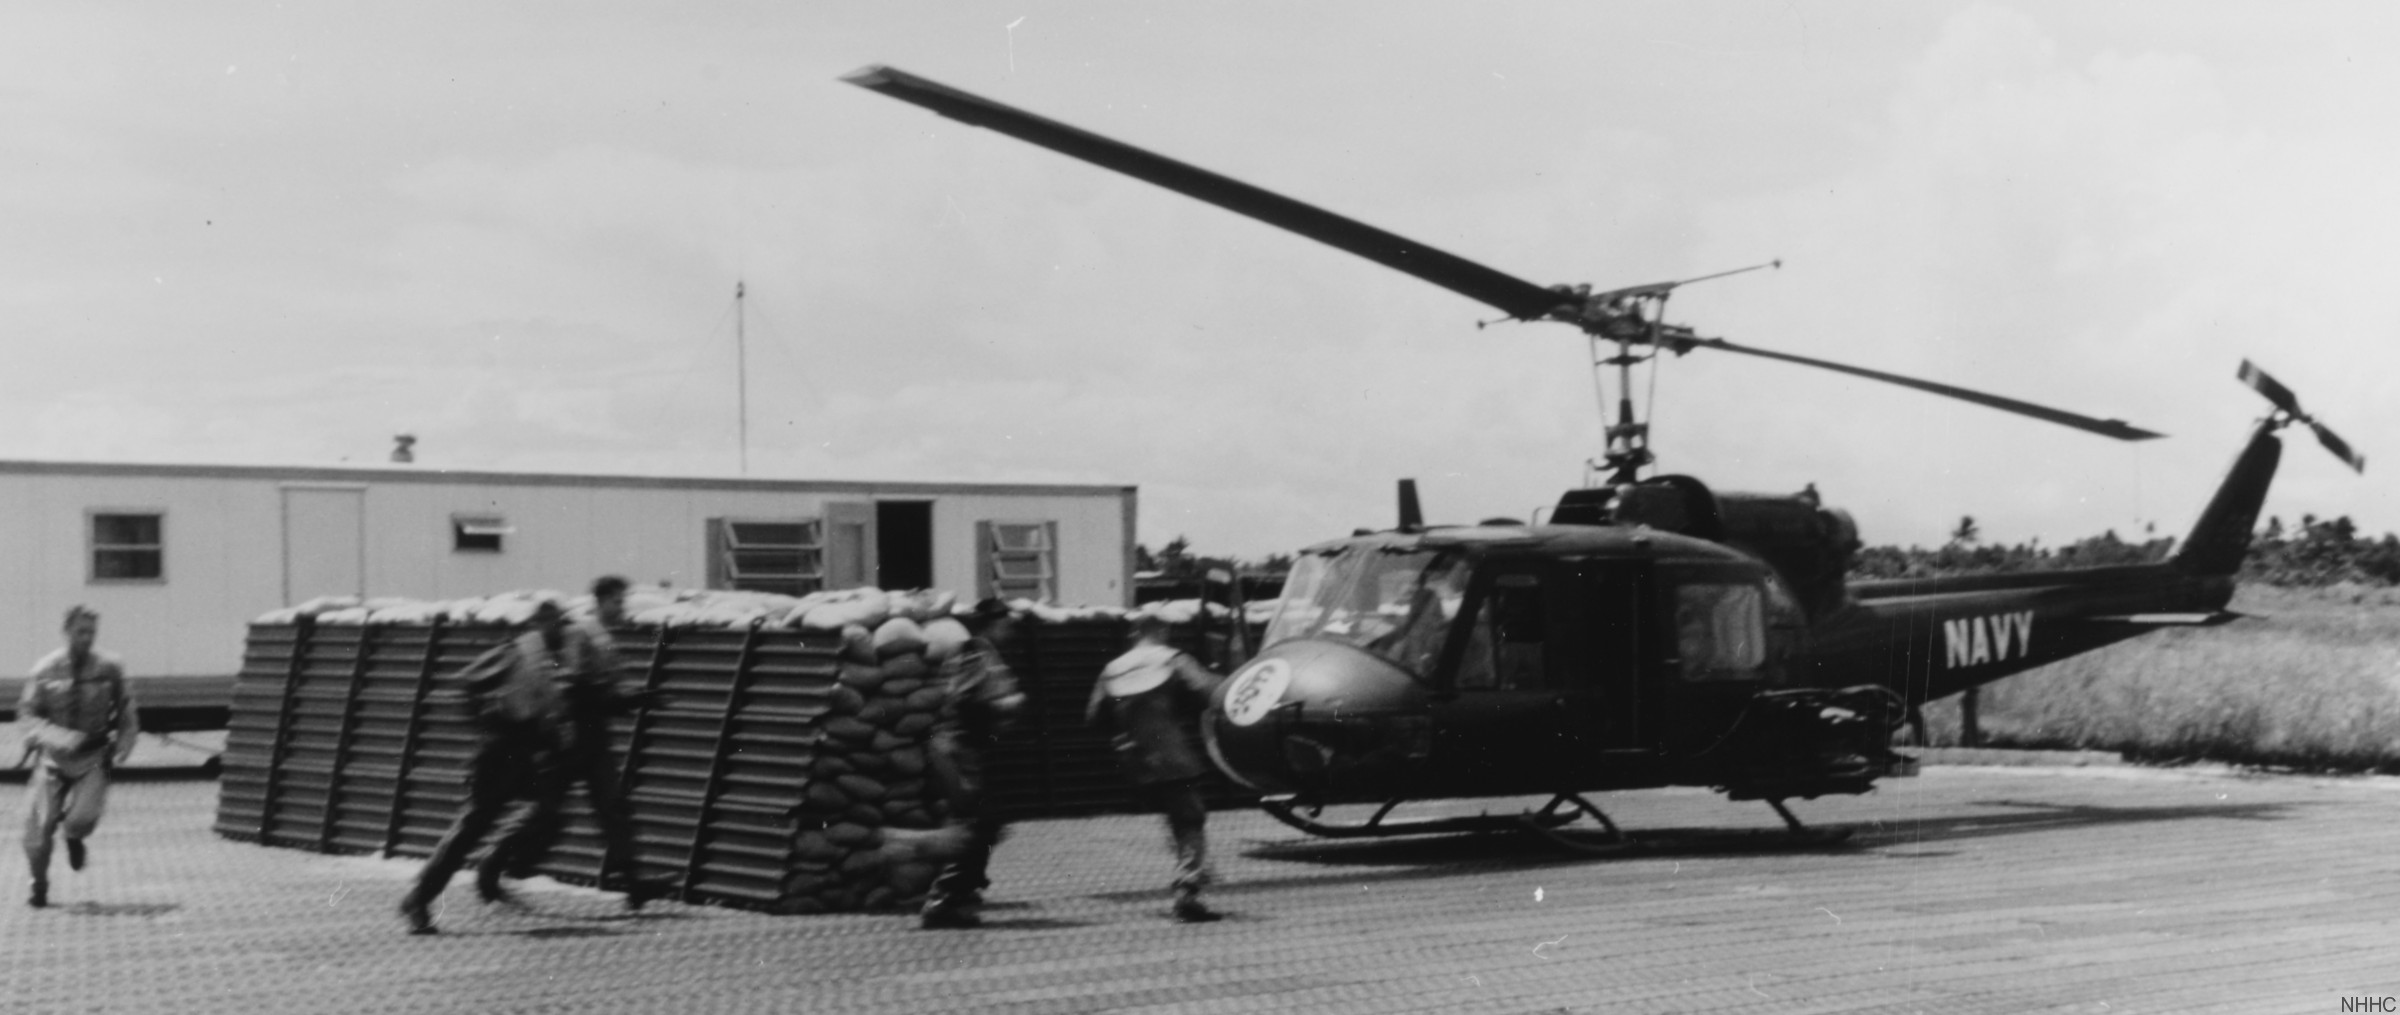 hal-3 seawolves helicopter attack squadron light us navy uh-1 huey 16